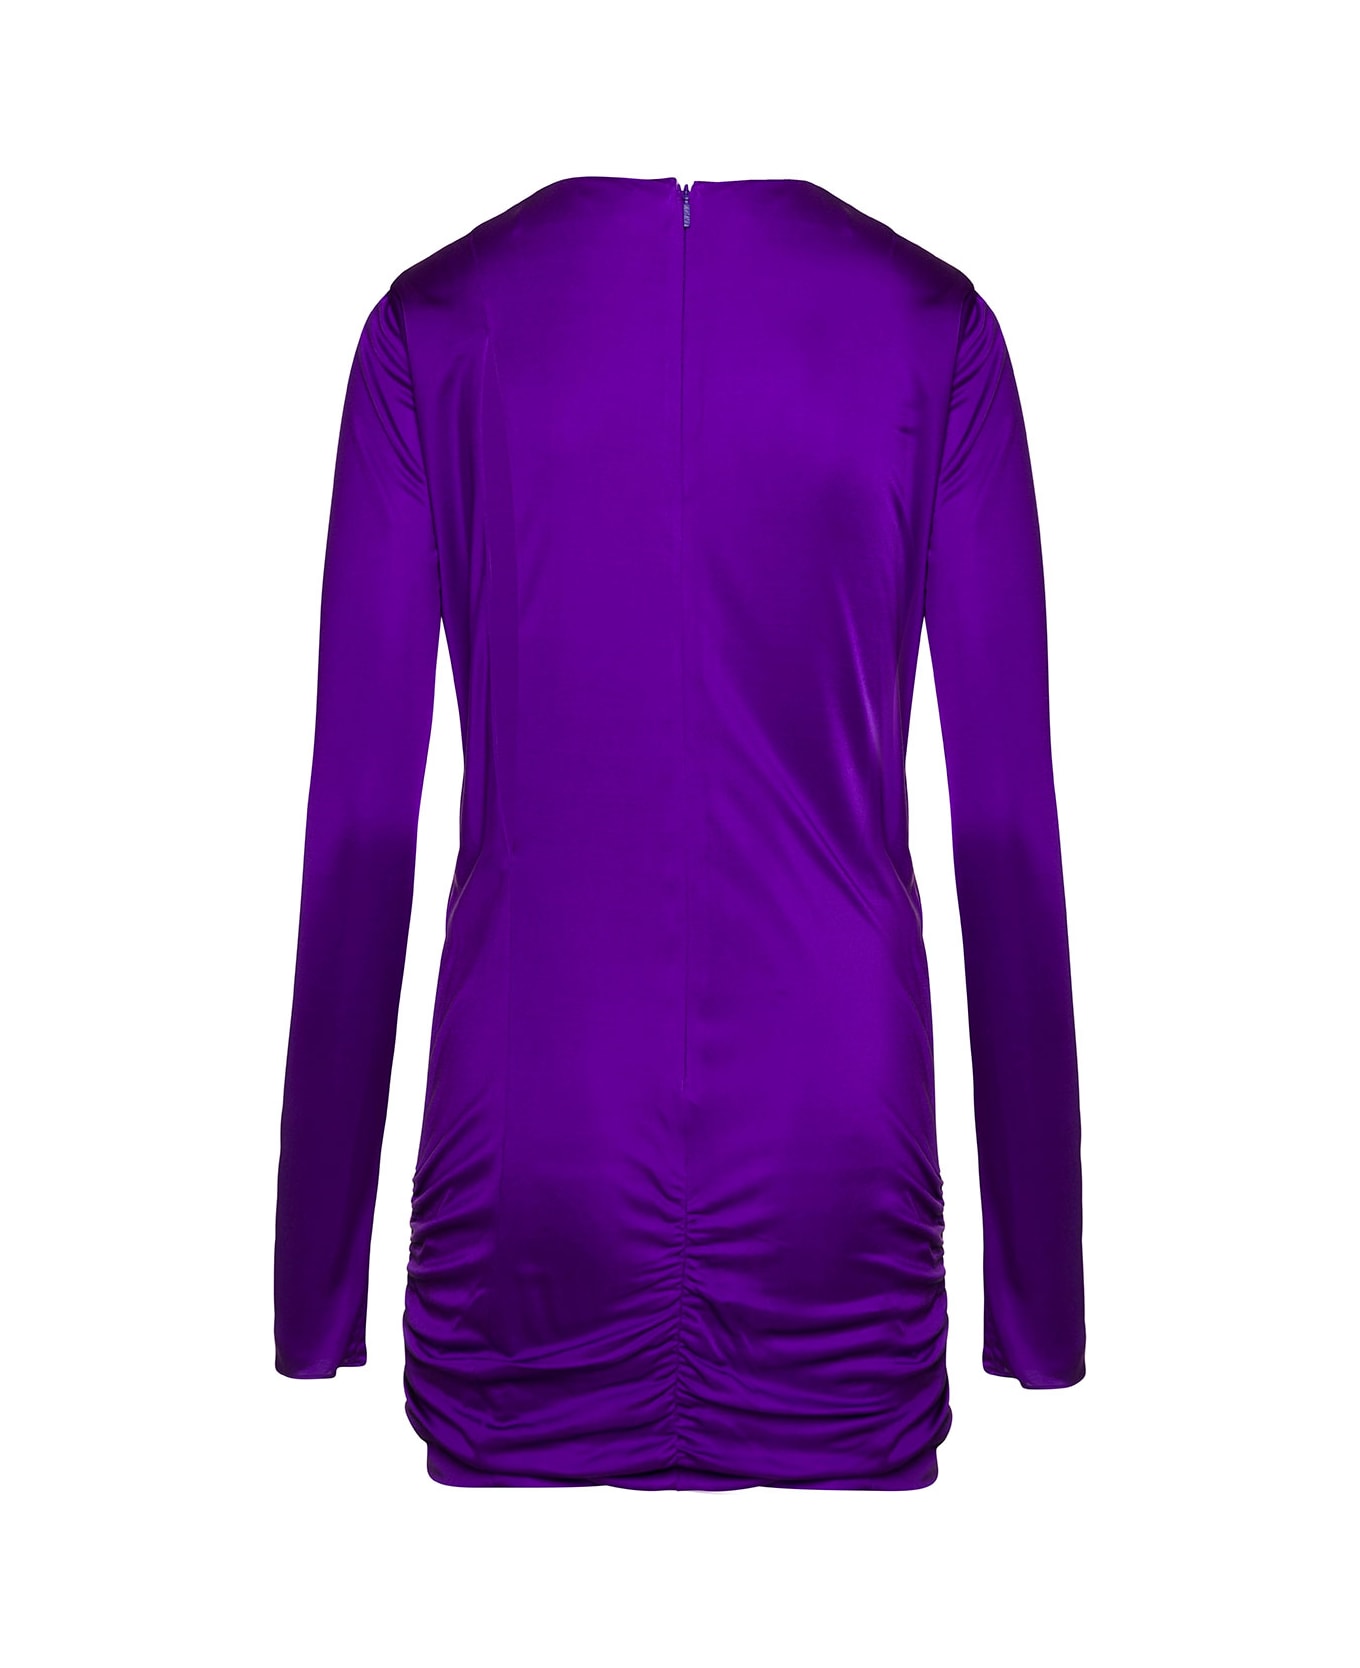 Versace Purple Minidress With Cut-out Detailing Satin Effect In Viscose Woman - Violet